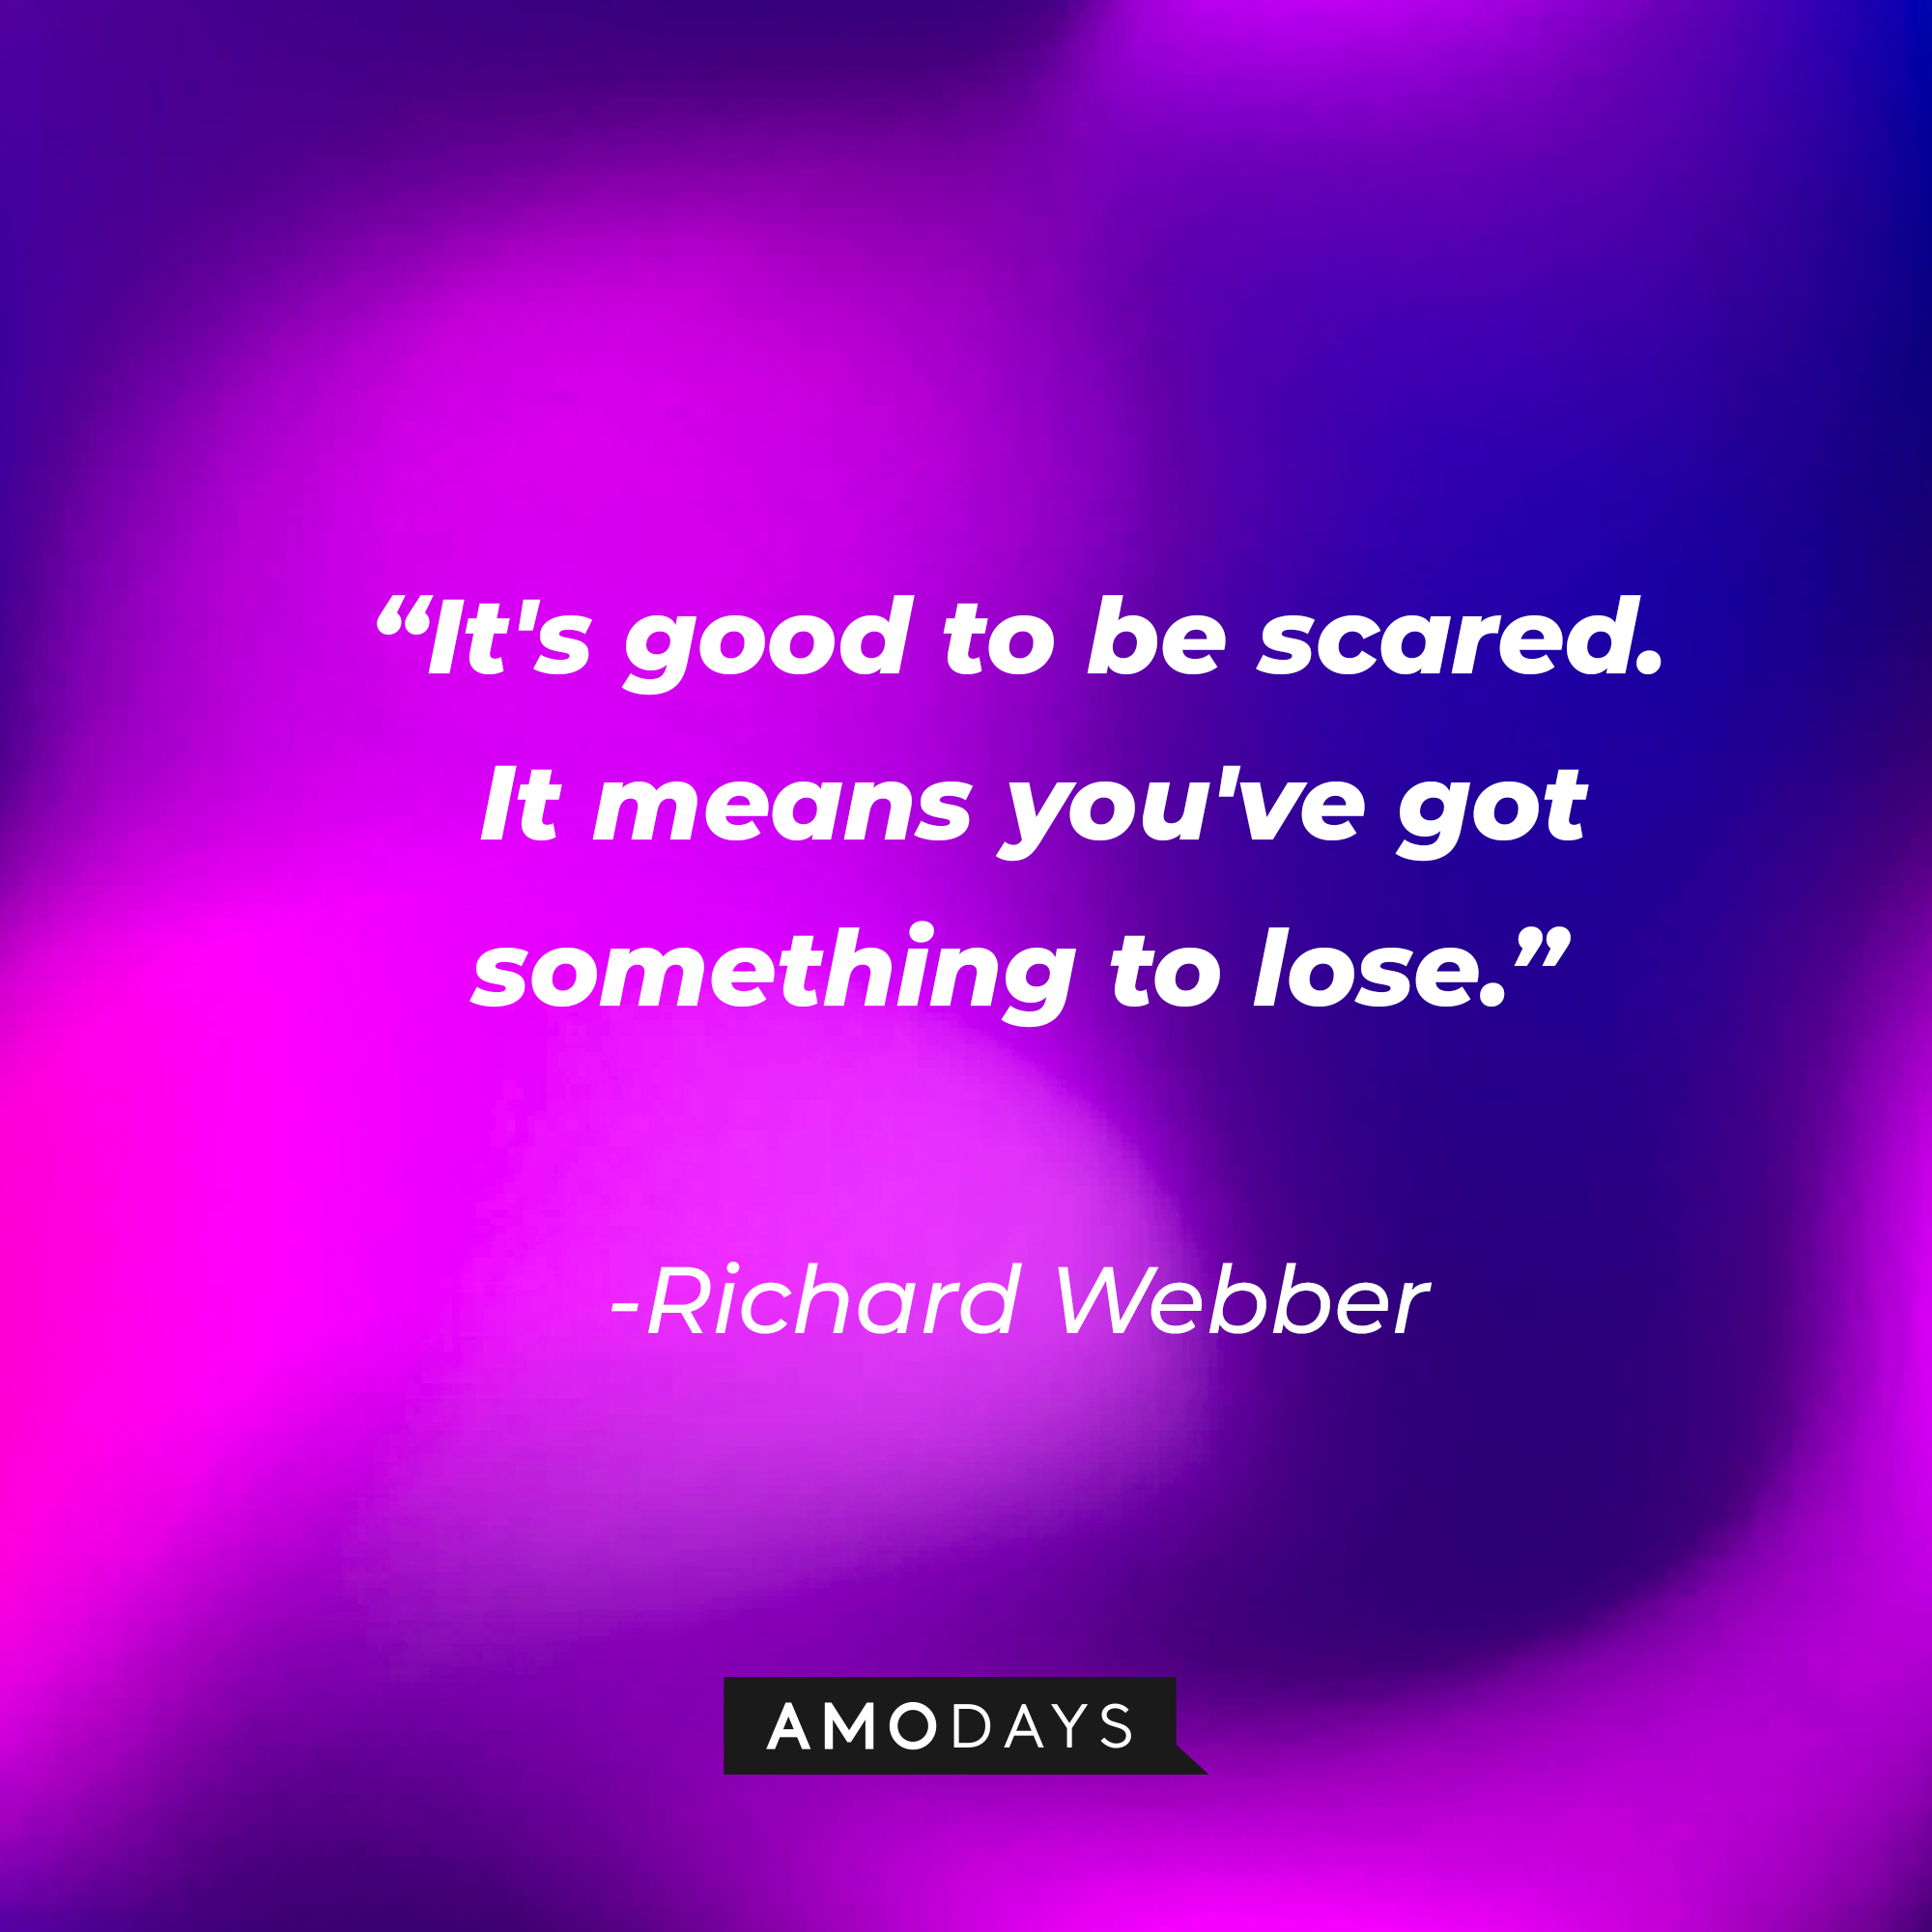 Richard Webber with his quote: "It's good to be scared. It means you've got something to lose." | Source: Amodays